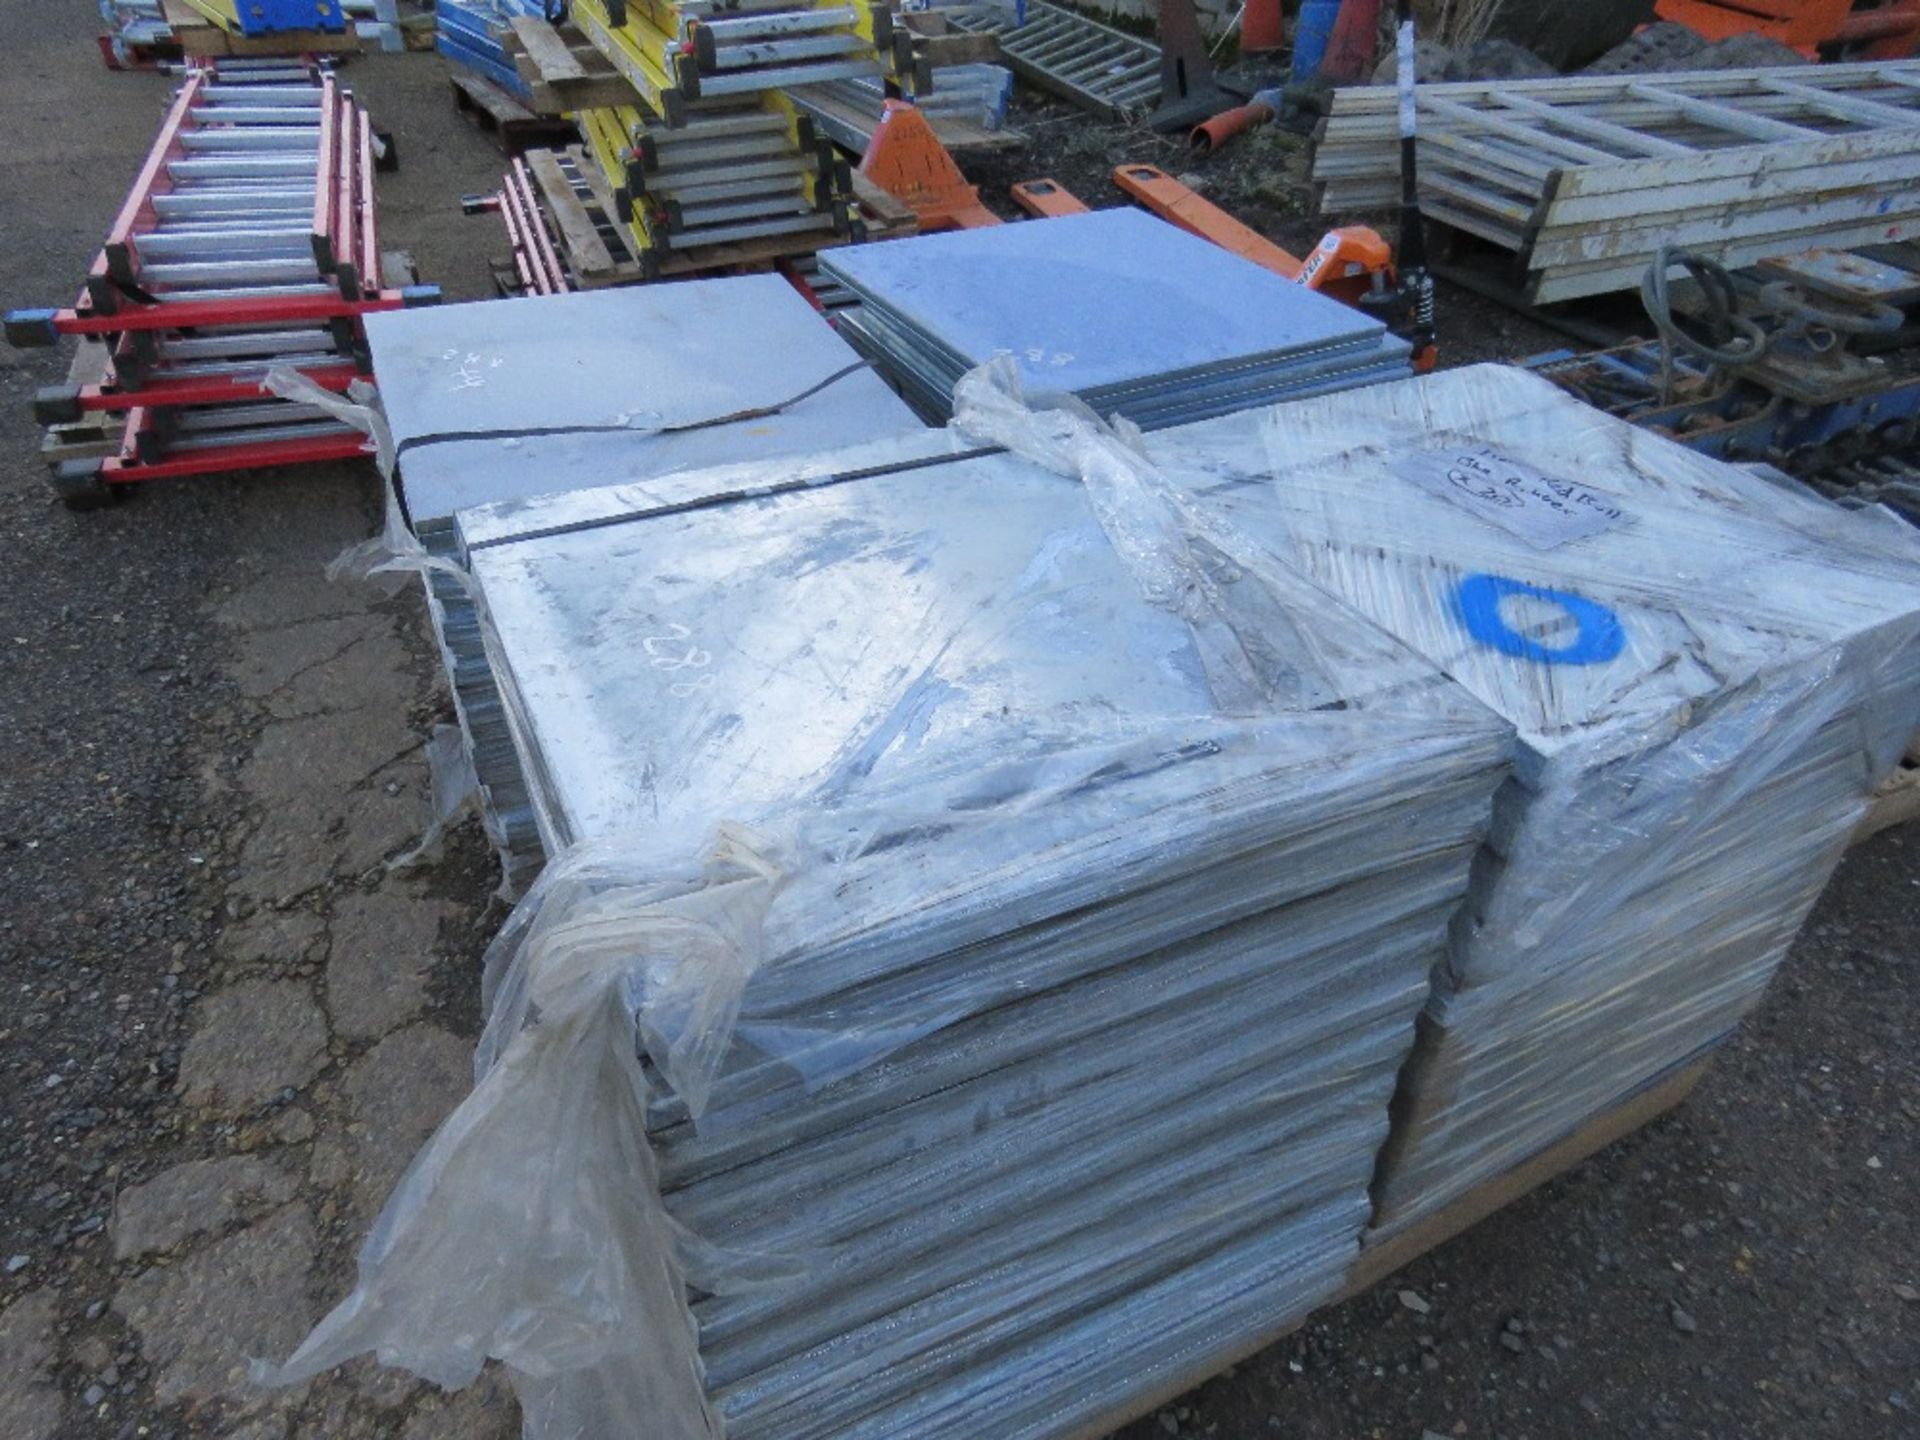 4 X PALLETS OF ASSORTED TEMPORARY HD EXHIBITION FLOORING TILES, IDEAL FOR GARAGE FLOOR ETC. - Image 3 of 3